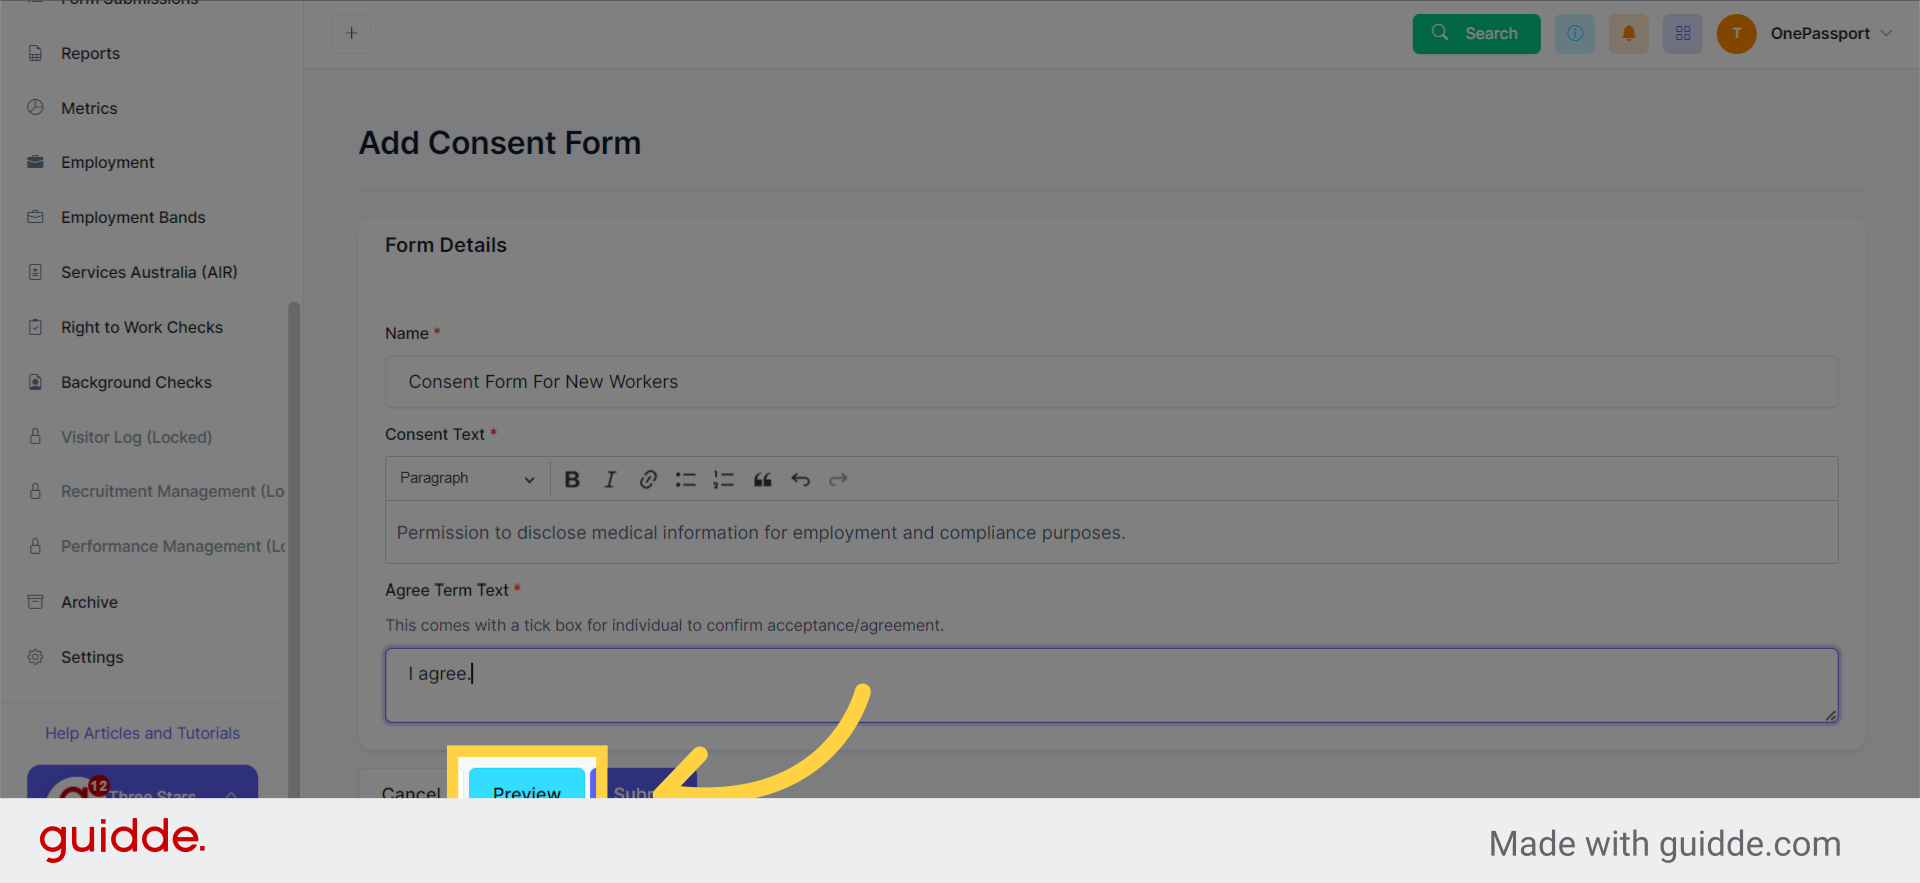 Click 'Preview' to check how does the form looks like from the worker's perspective.